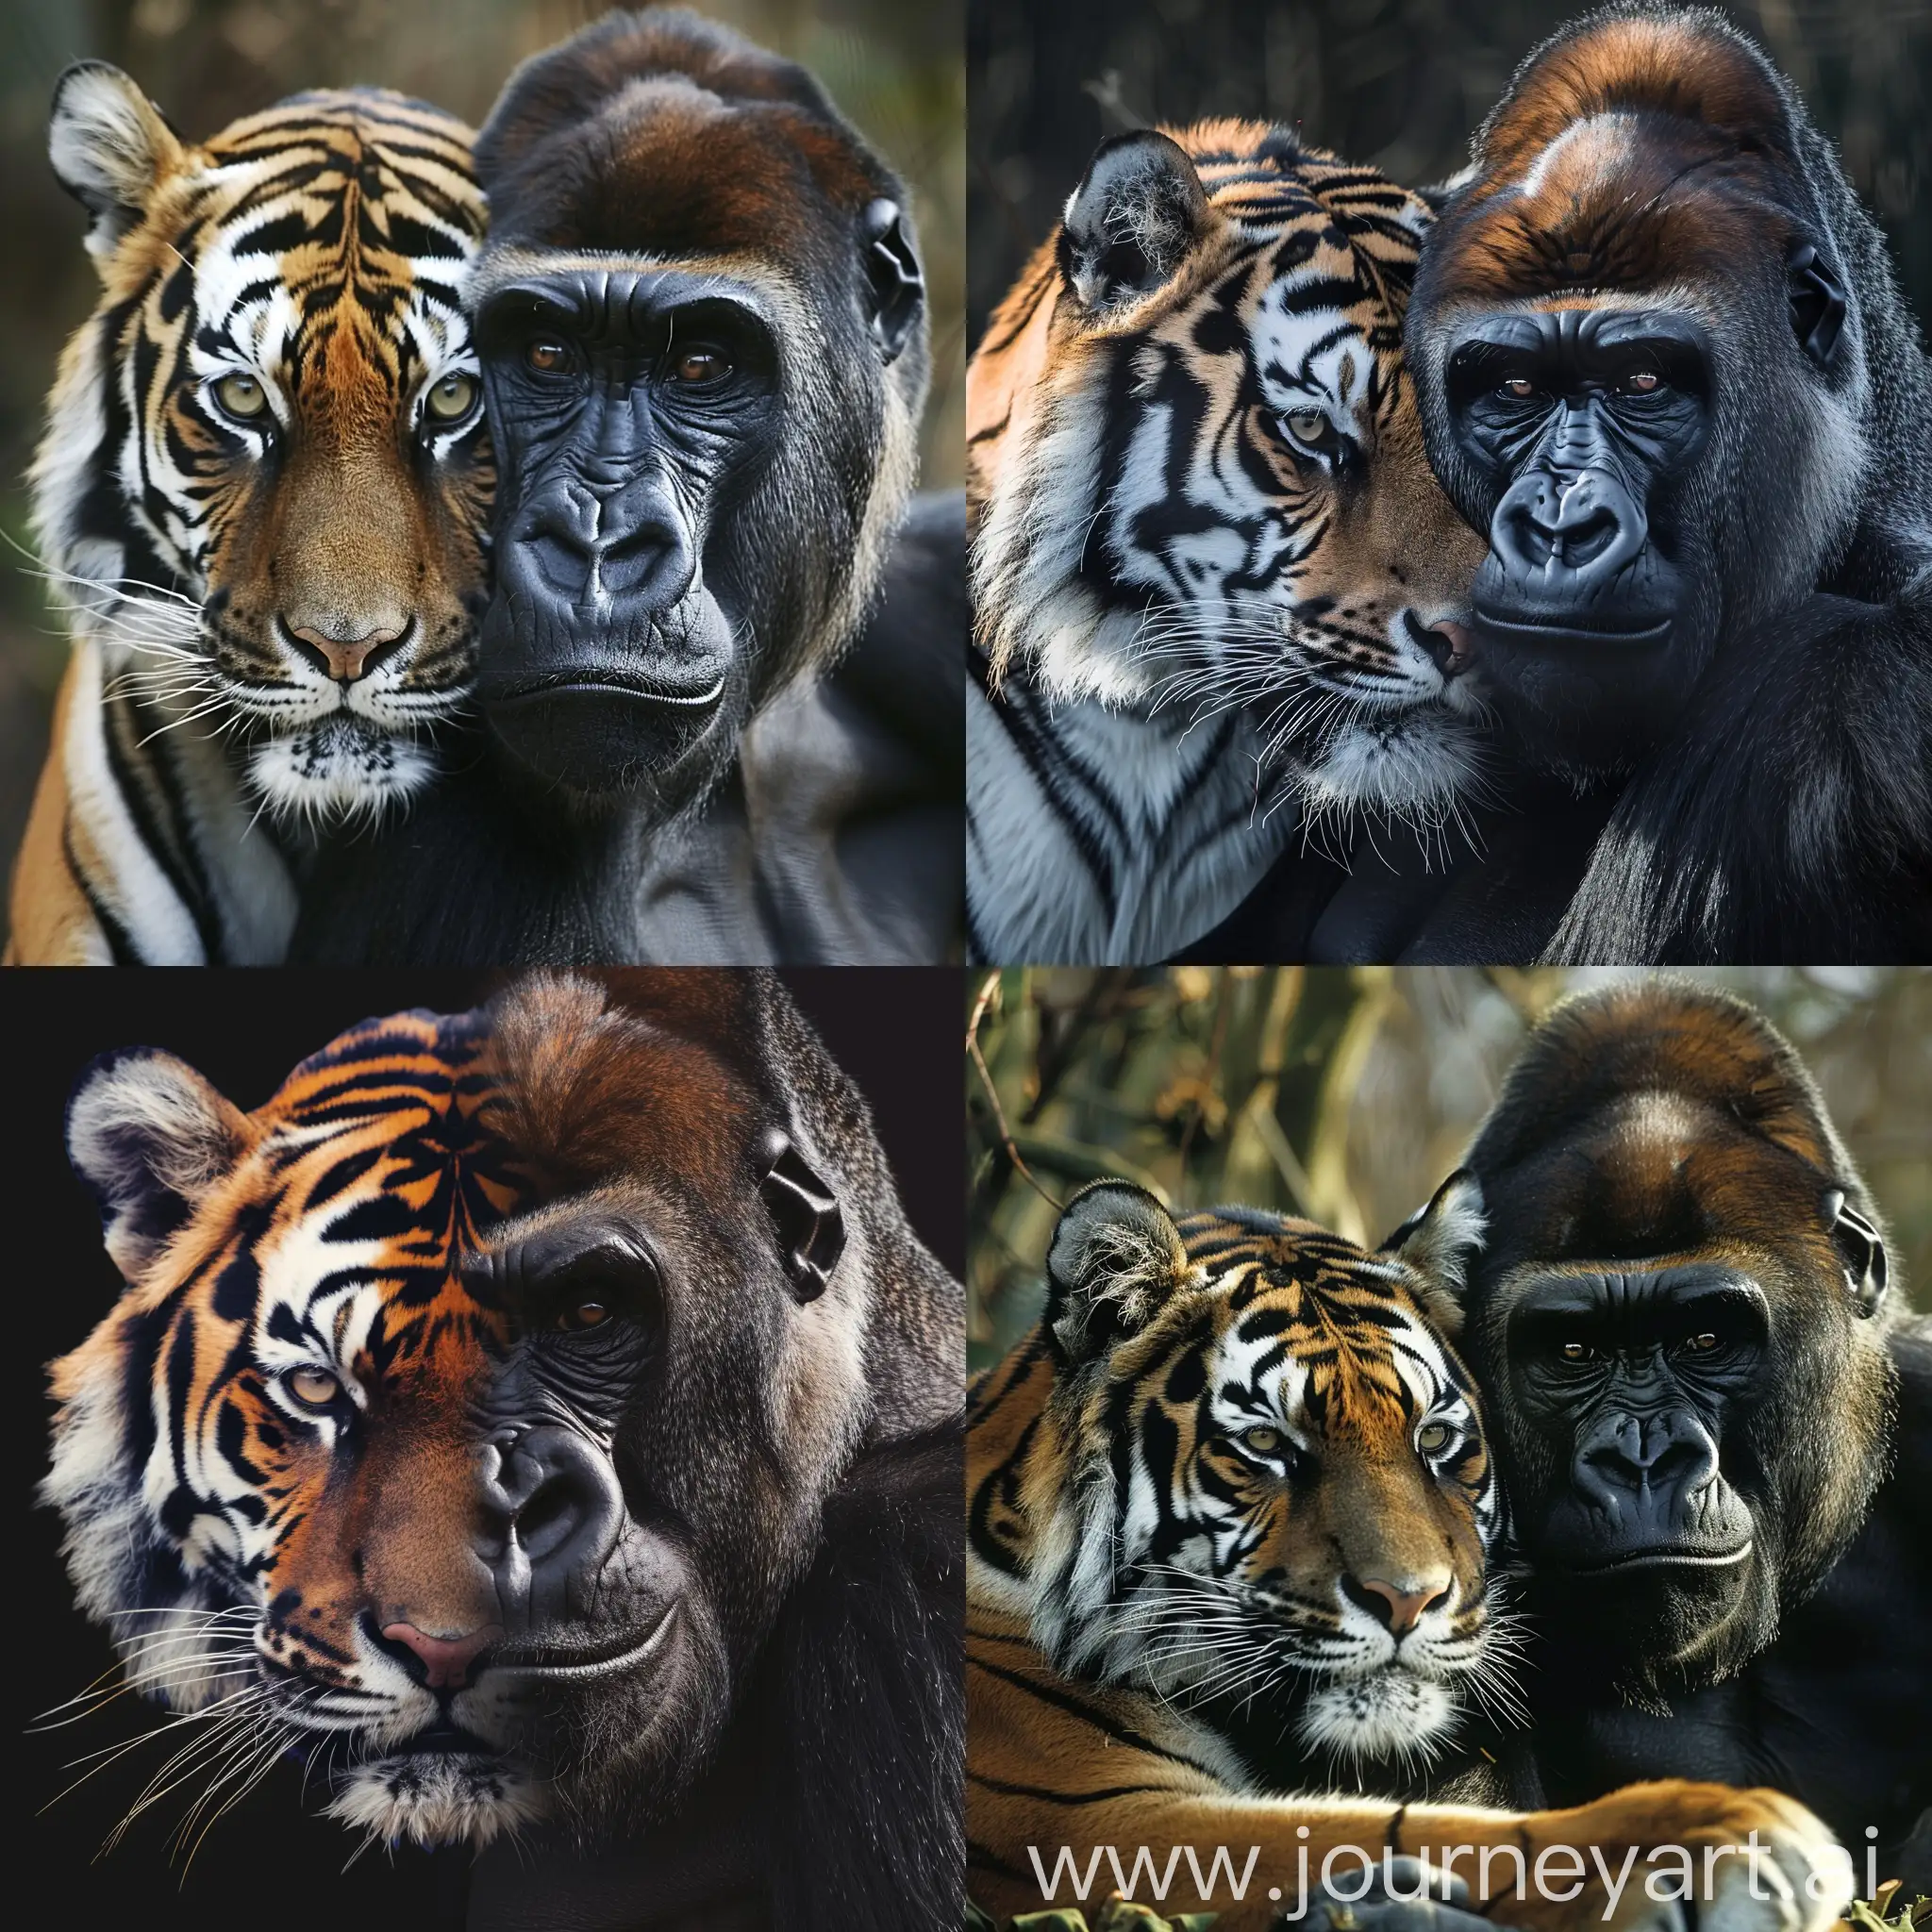 Combination of tiger and gorilla